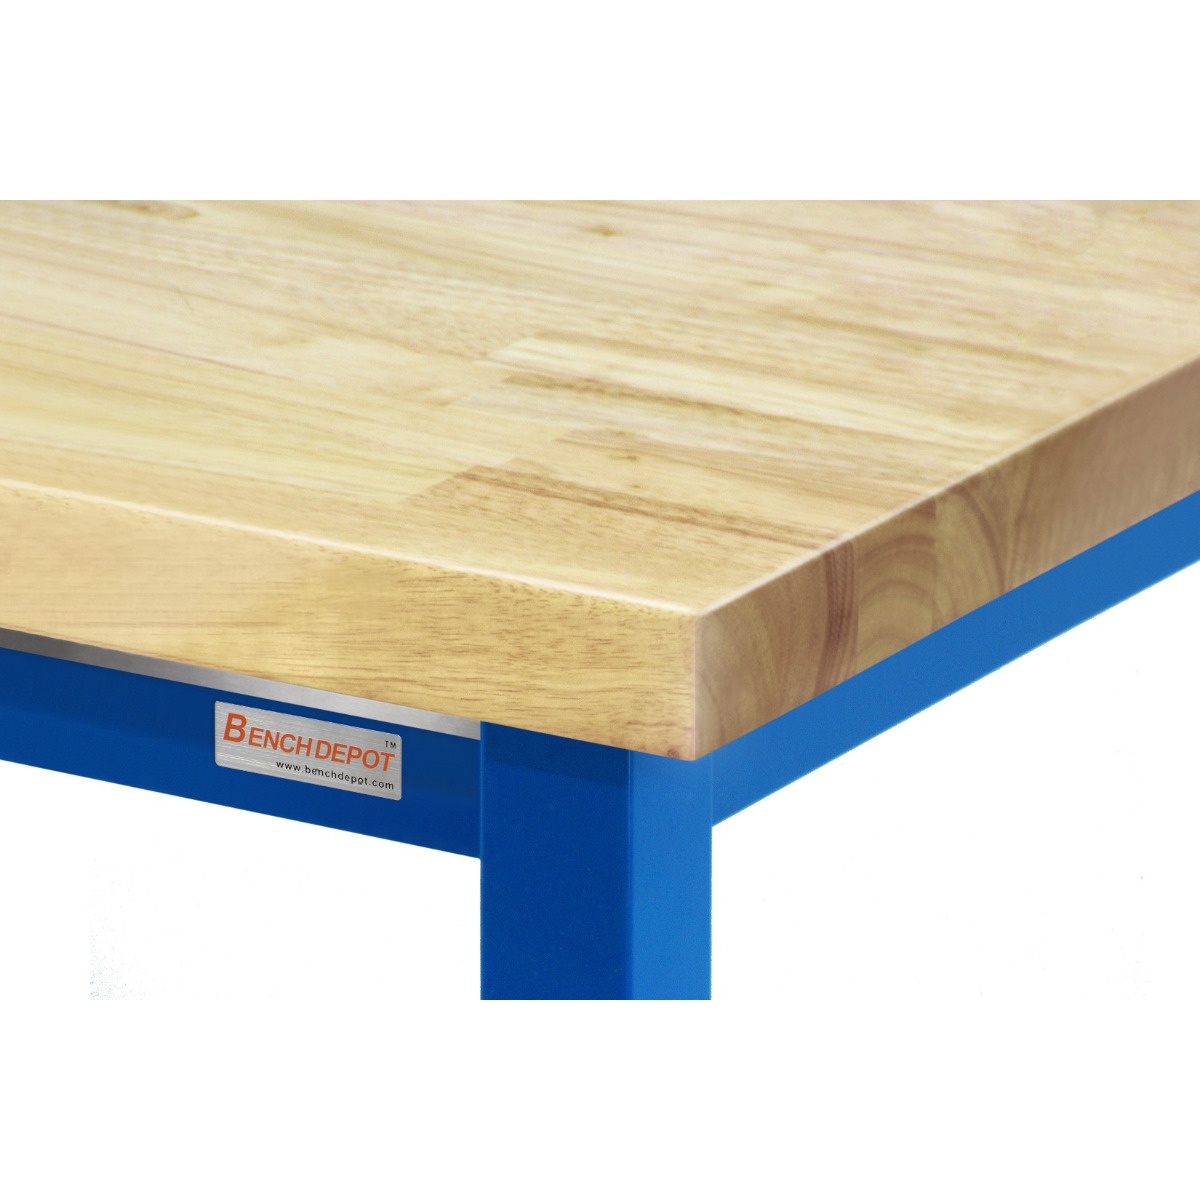 24" Wide Kennedy Benches with Lacquered Solid Maple Hardwood 1-3/4" Thick Top - Square Cut Edge